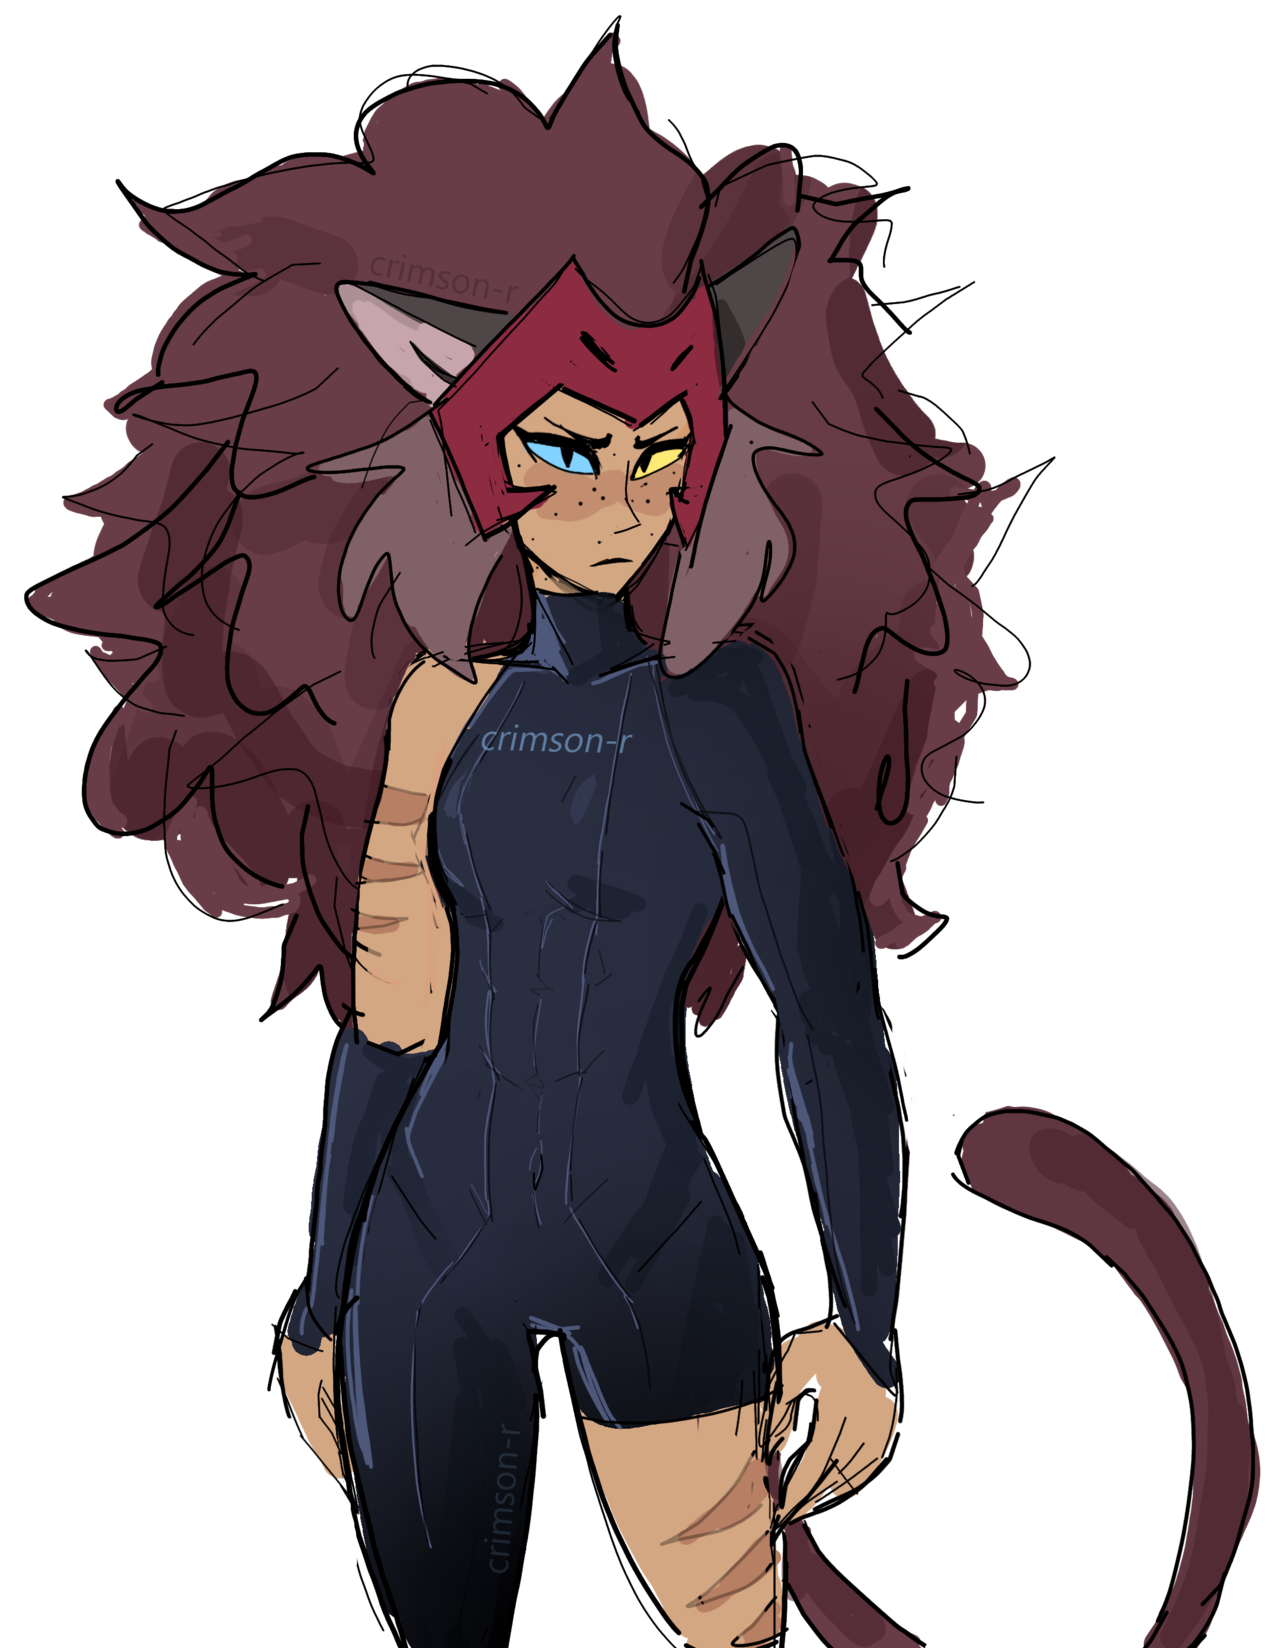 The Crimson Waste MORE Catra In Clothing Without A Horde.